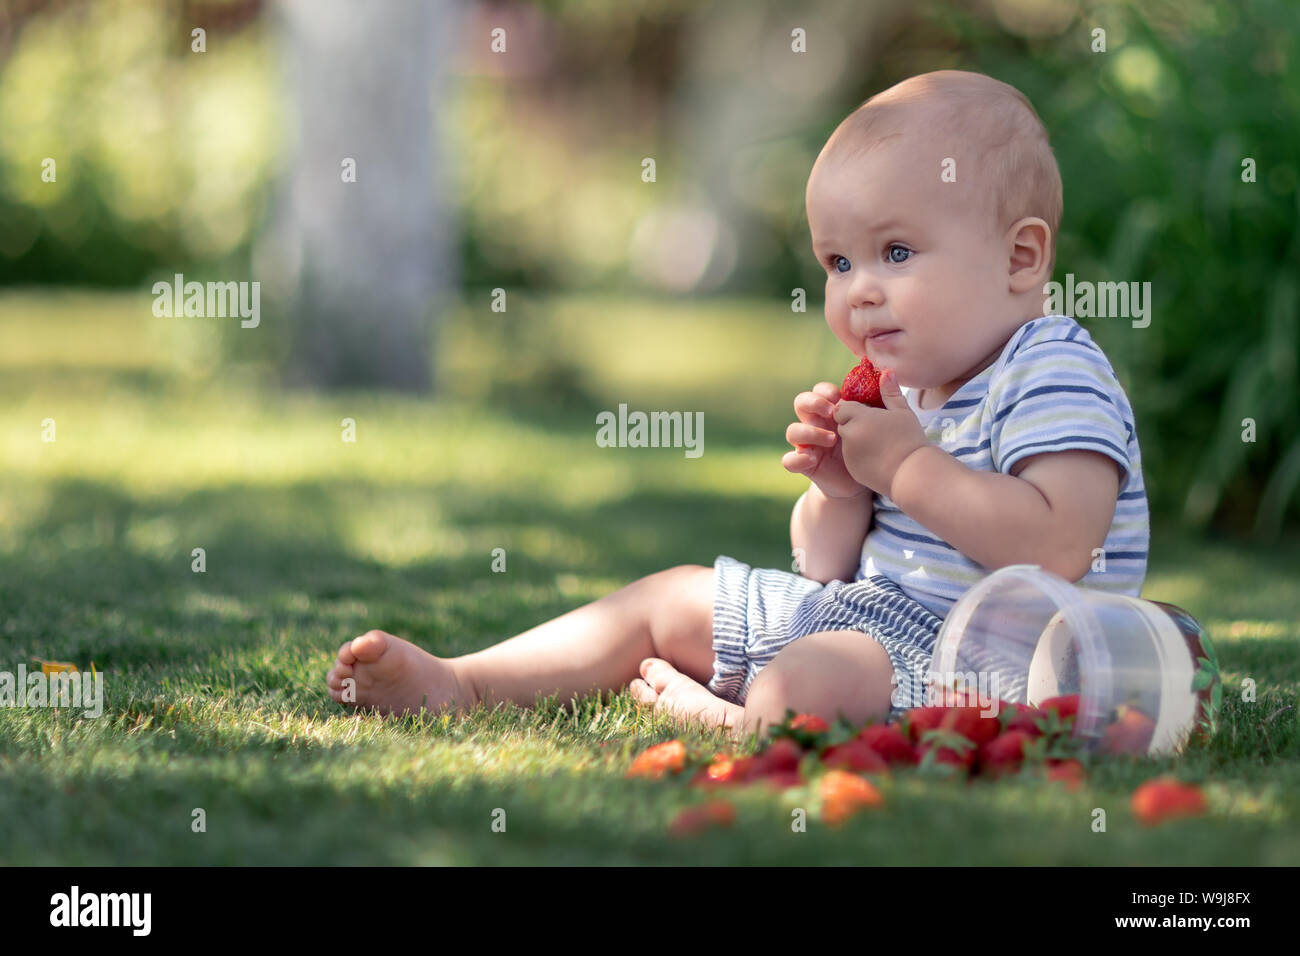 Adorable baby sitting on the grass in the garden and eat strawberry Stock Photo